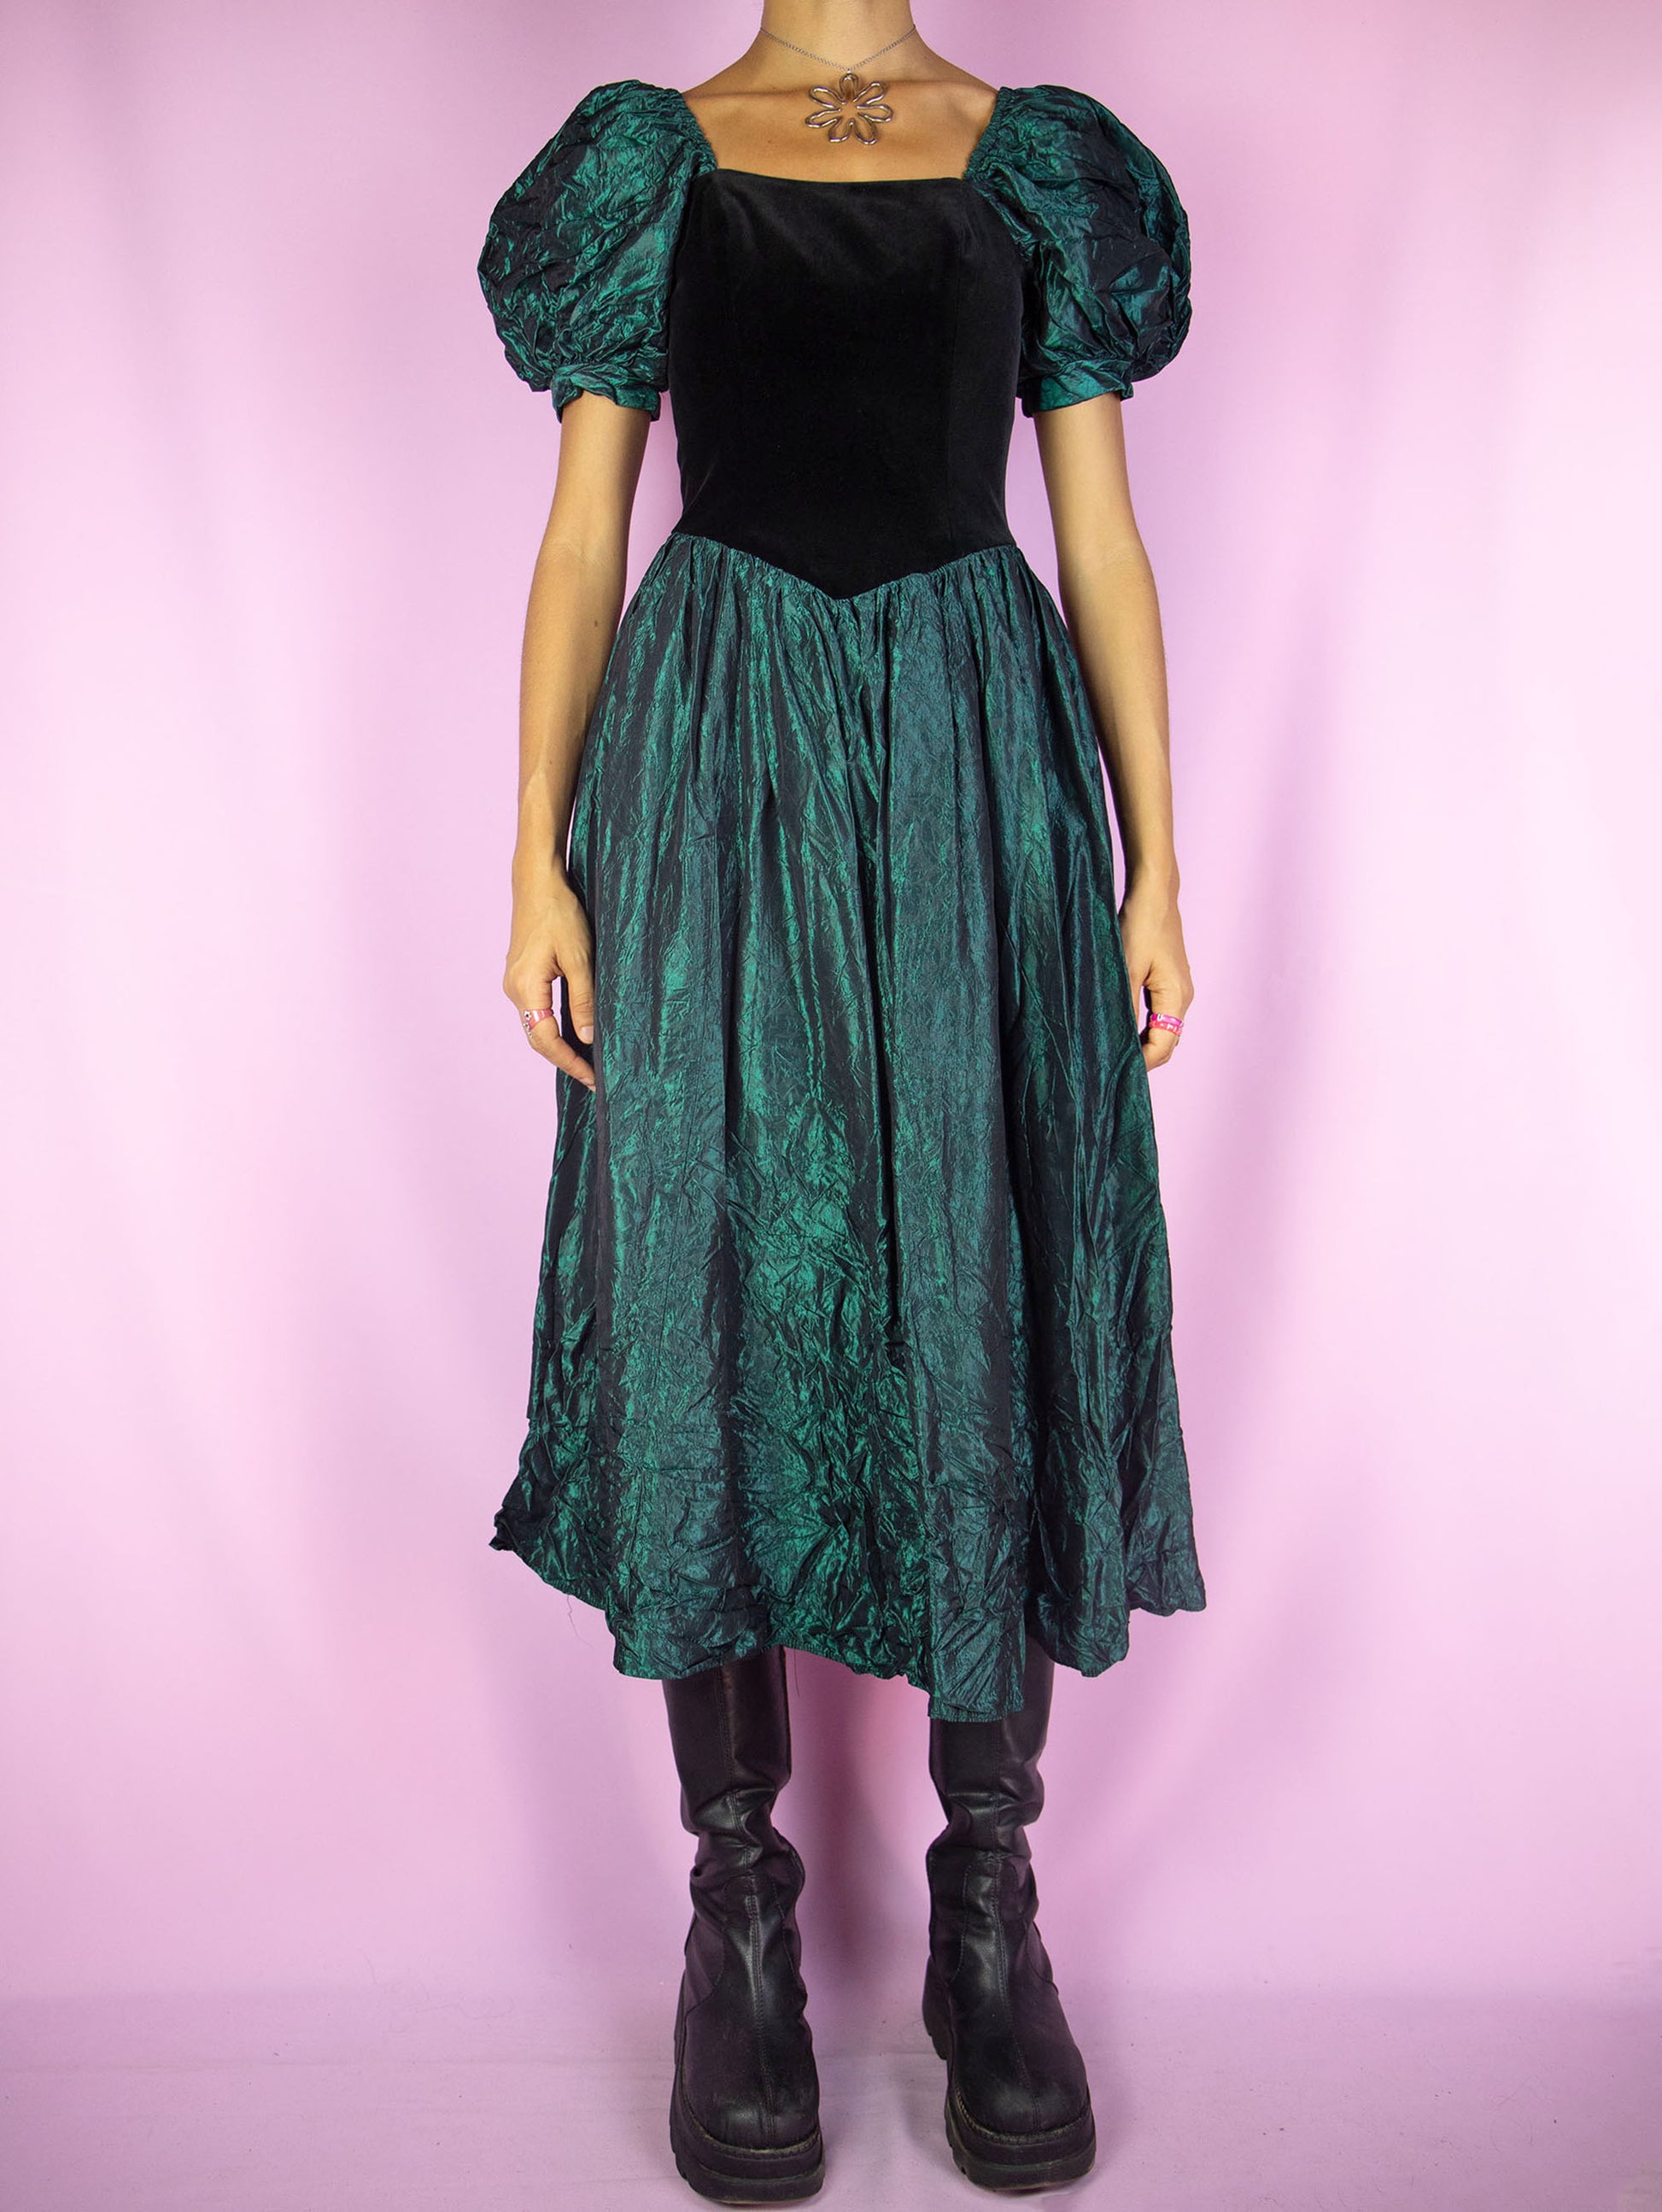 The Vintage 90s Puff Sleeve Midi Dress is an iridescent green flared dress with puff sleeves, black velvet front and back zipper closure. Cottage regency inspired 1990s dark romantic whimsygoth maxi dress.